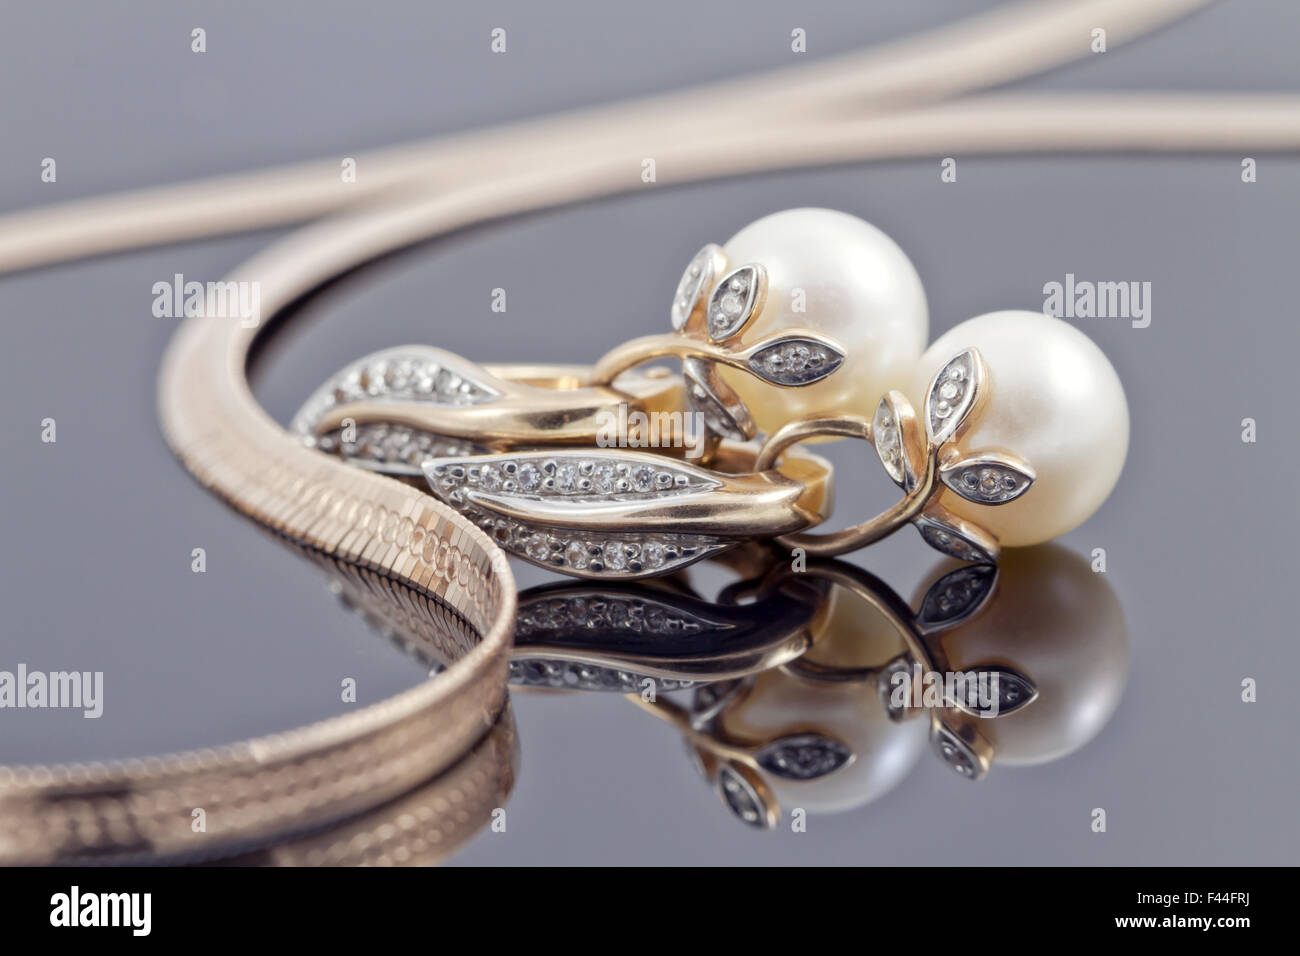 gold earrings with pearls Stock Photo